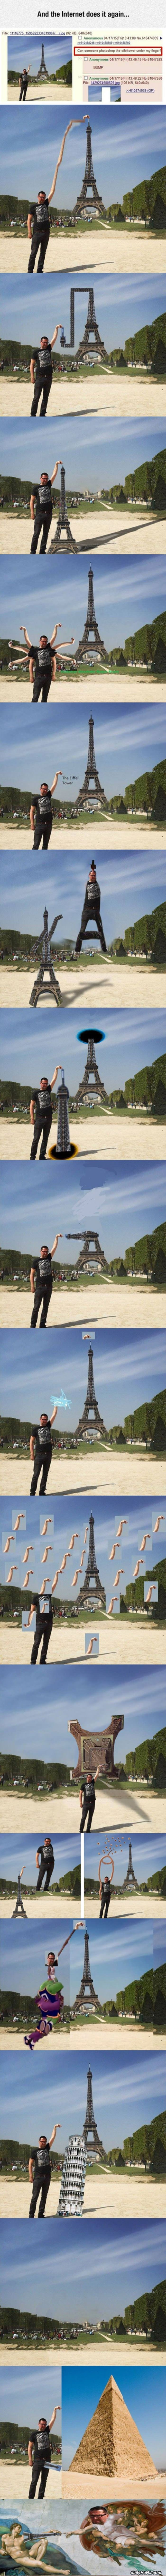 eiffel tower tourist photoshop funny picture